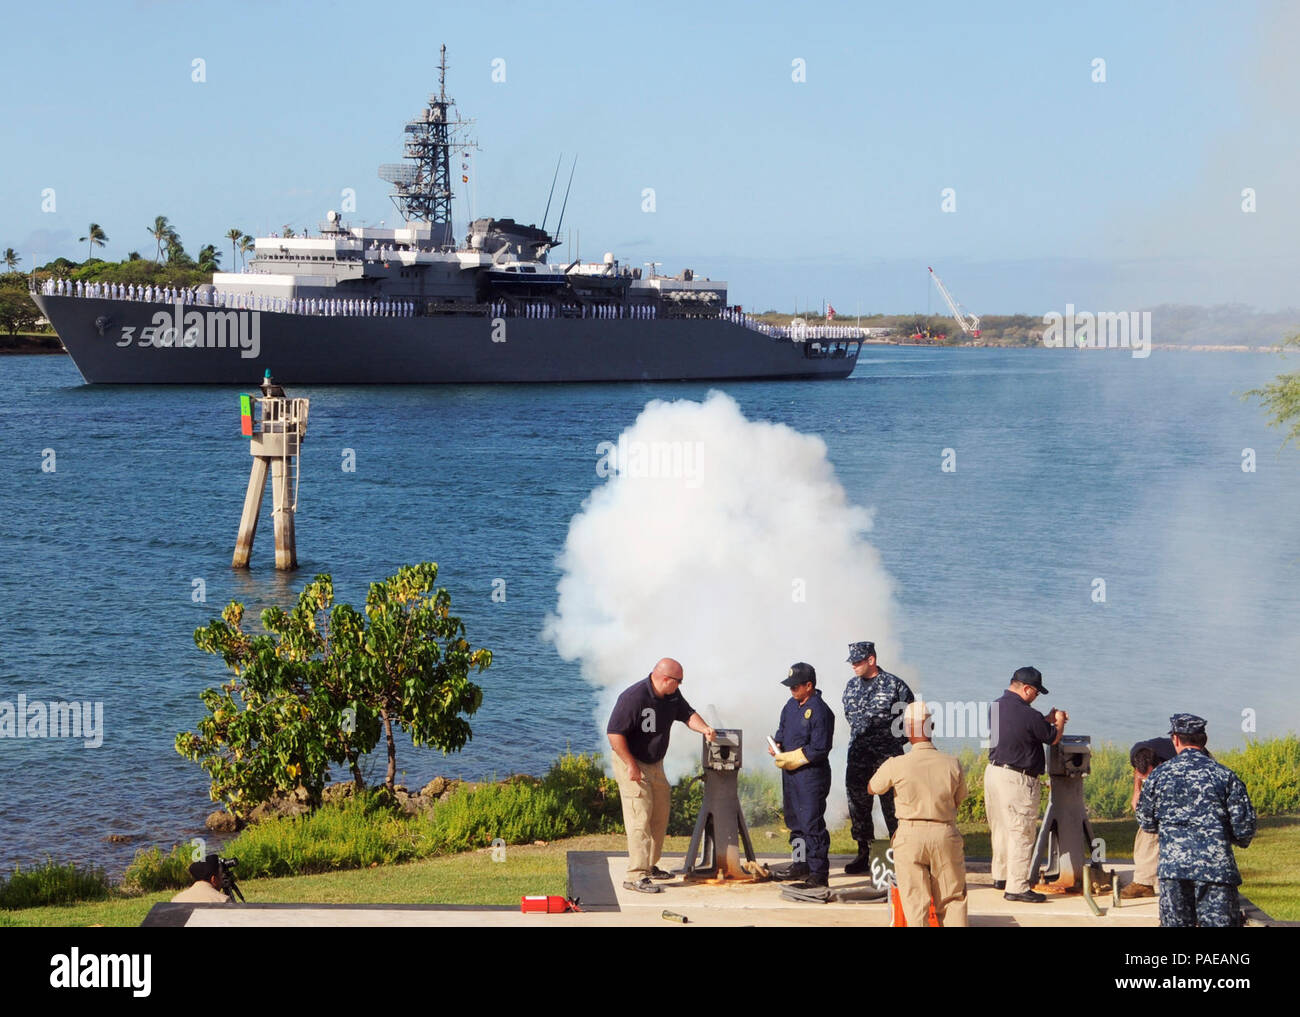 Members of Lockheed Martin and Joint Base Pearl Harbor-Hickam Security Department perform a 21-gun salute for the arrival of the Japan Maritime Self-Defense Force training squadron ship JS Kashima (TV 3508) for a port visit. This year marks the 50th anniversary of the U.S. and Japan Treaty of Mutual Cooperation of Security that in 1960 established the alliance between the two countries. Stock Photo